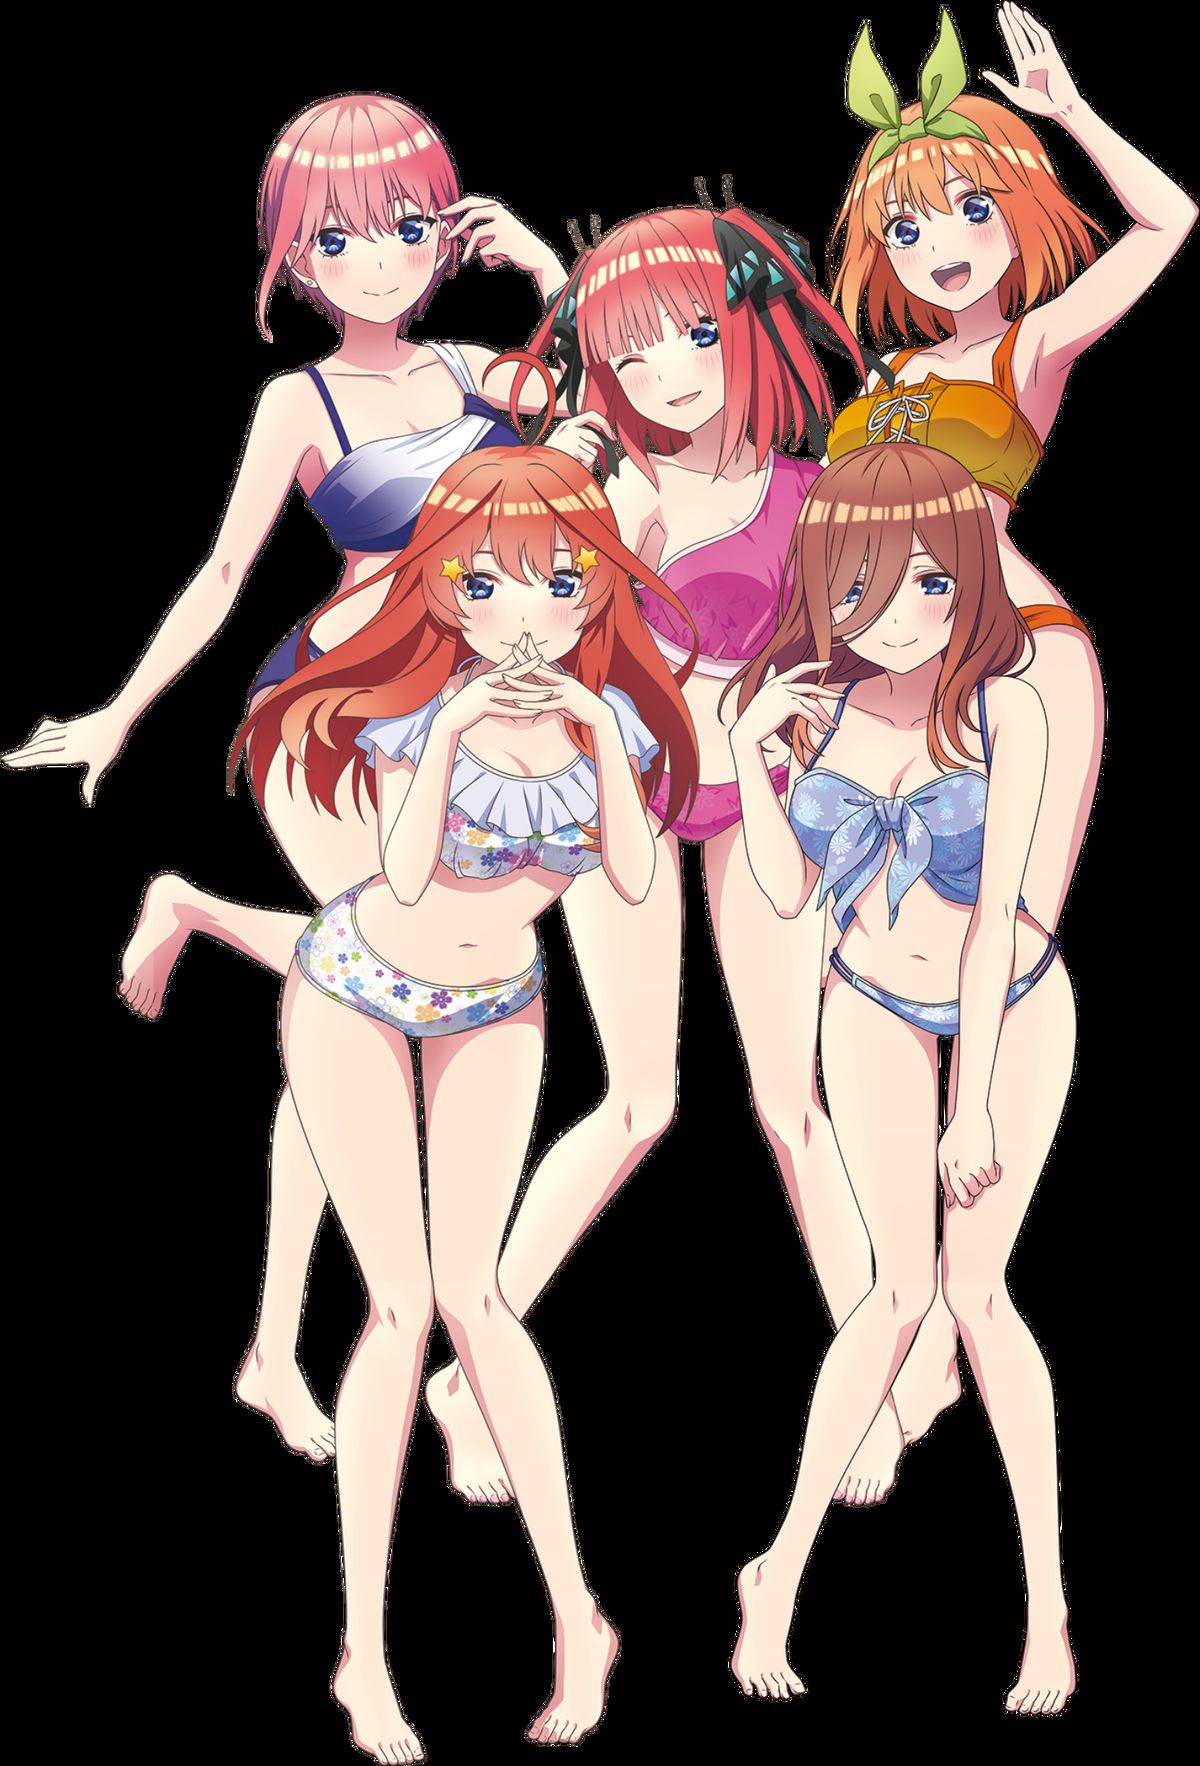 PS4 / Switch "Movie "Five Memories Of Five Equals" - Five Memories Spent With You" Girls' Erotic Swimsuits, etc. 2